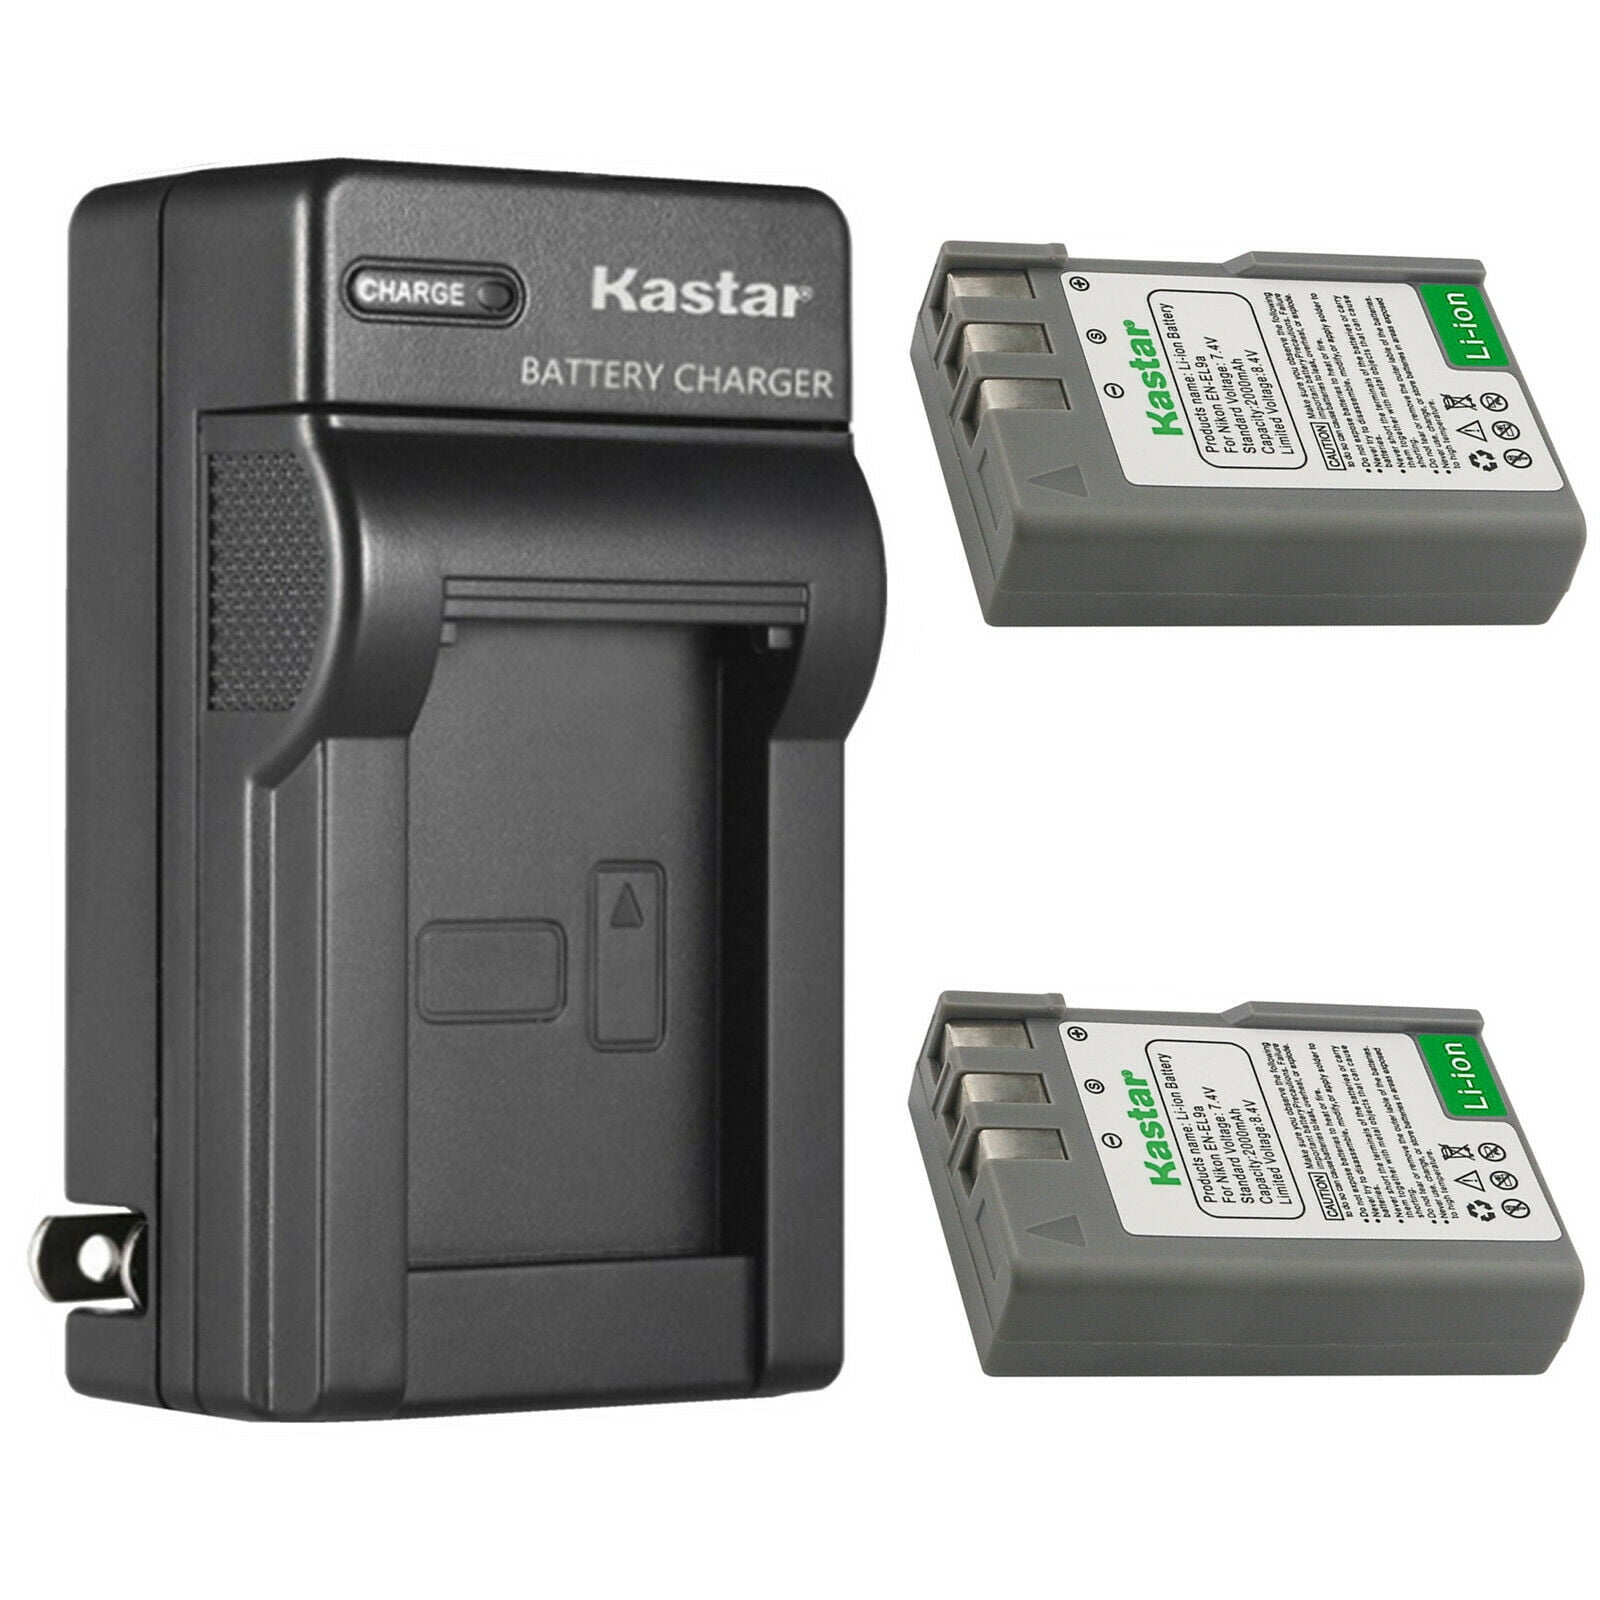 D5000 SLR Digital Camera D60 SLR Digital Camera Kastar 2-Pack EN-EL9 Battery and LCD AC Charger Compatible with Nikon D40 SLR Digital Camera D40X SLR Digital Camera D3000 SLR Digital Camera